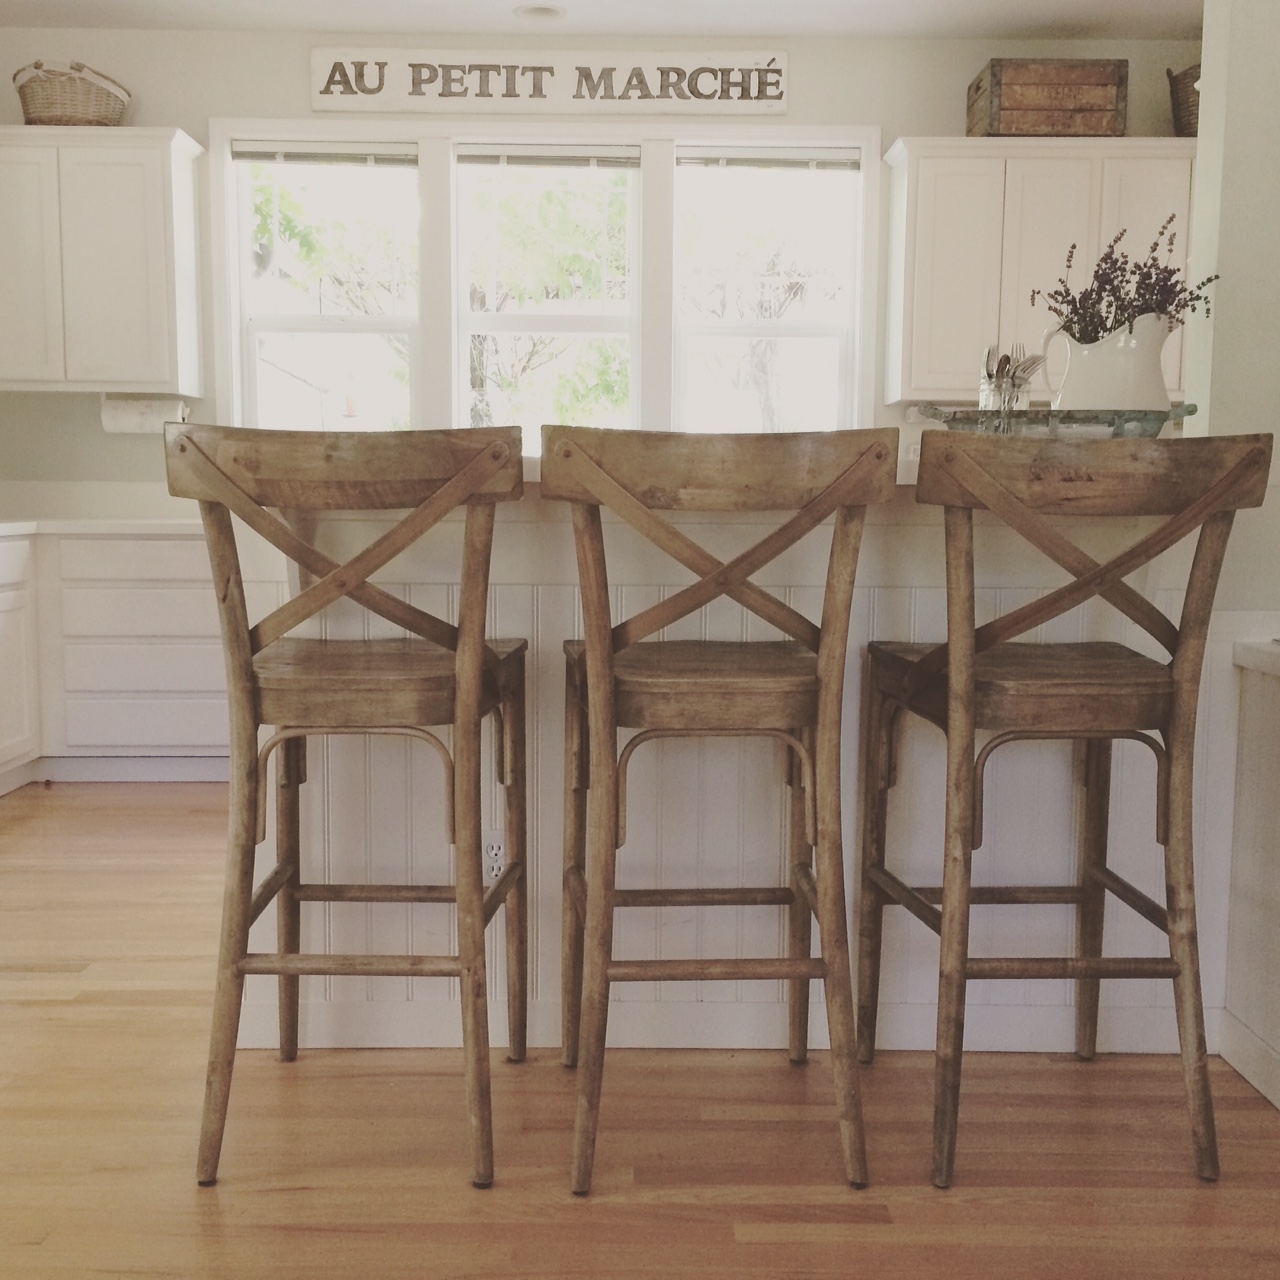 Kitchen Island With Bar Stools Visualhunt, Modern Country Bar Stools